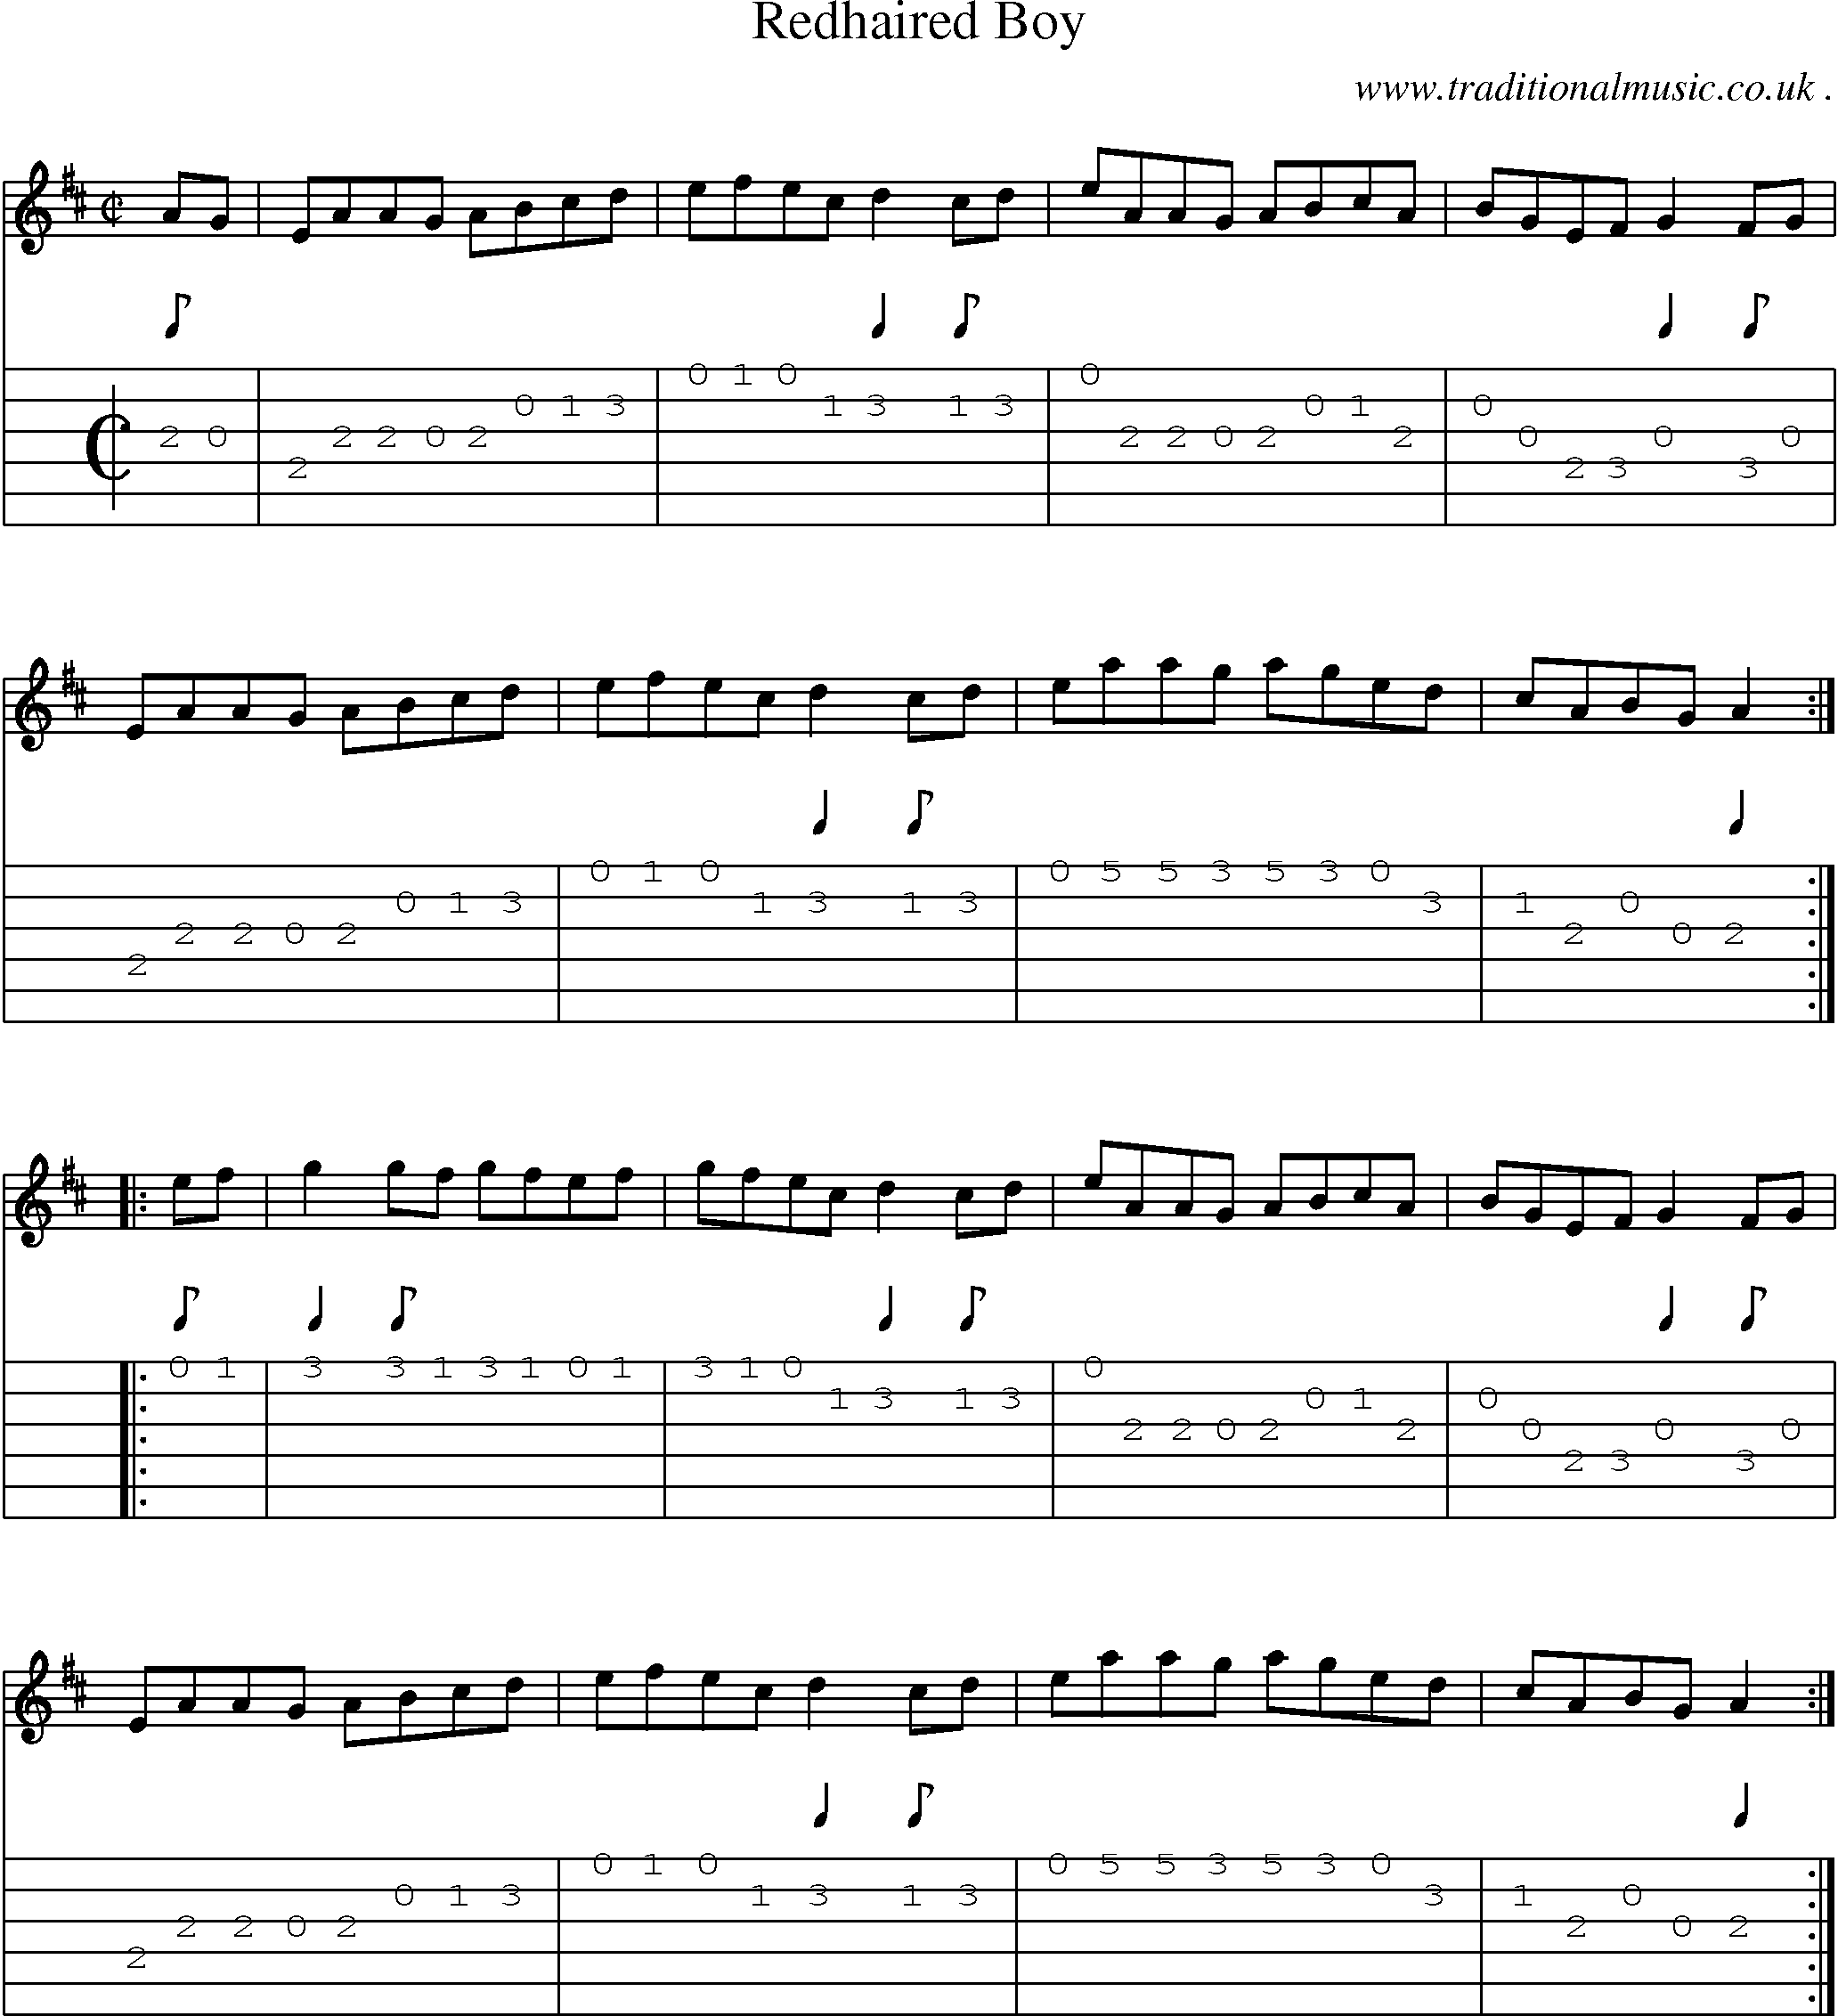 Sheet-Music and Guitar Tabs for Redhaired Boy